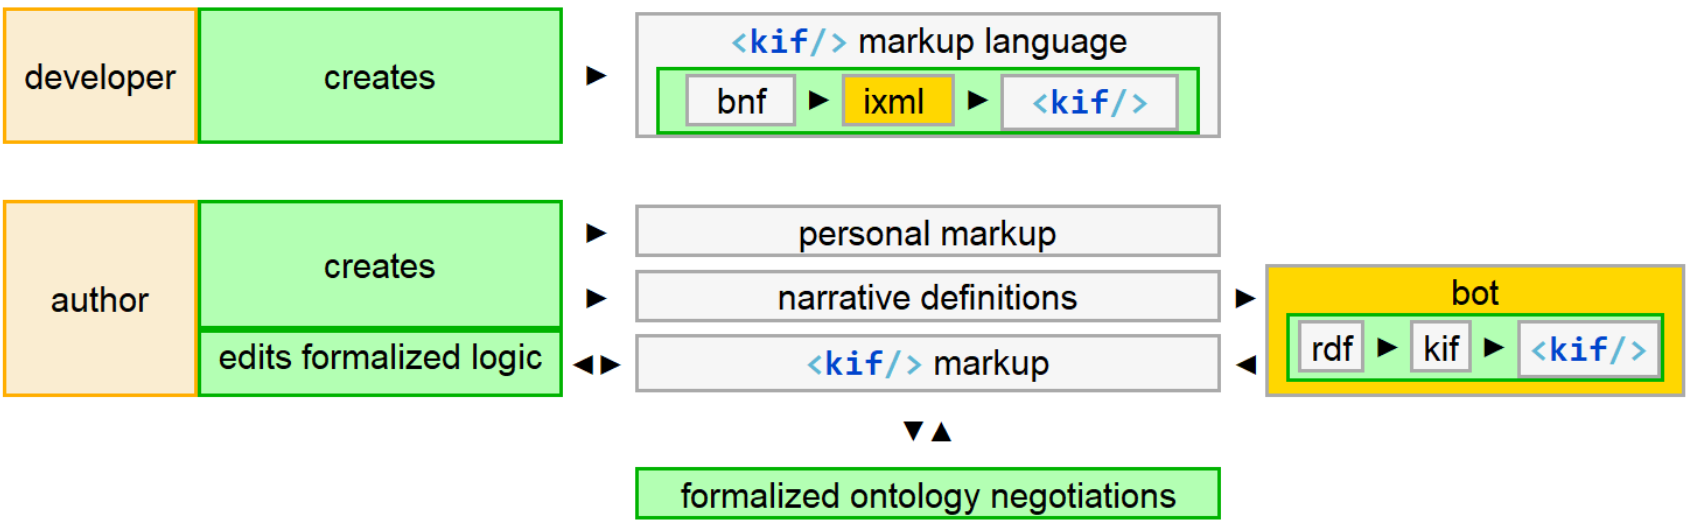 A developer creates the kif markup language. An author creates markup and definitions to feed a bot that generates kif markup, which feeds editorial and negotiation processes